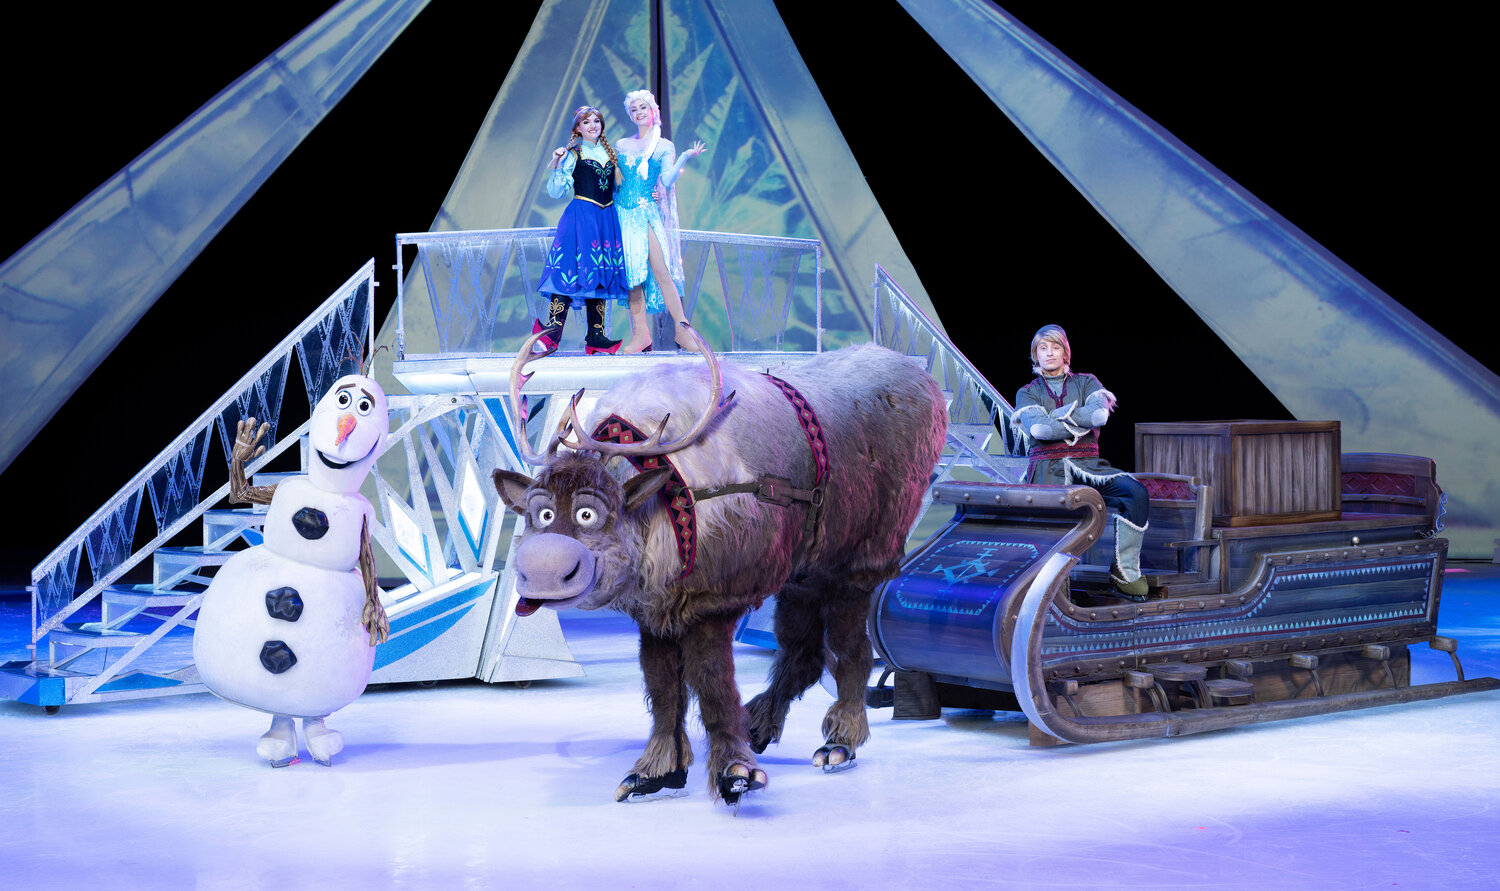 “Frozen” will make up half the adventure for audiences at “Disney On Ice” in Phoenix in January.